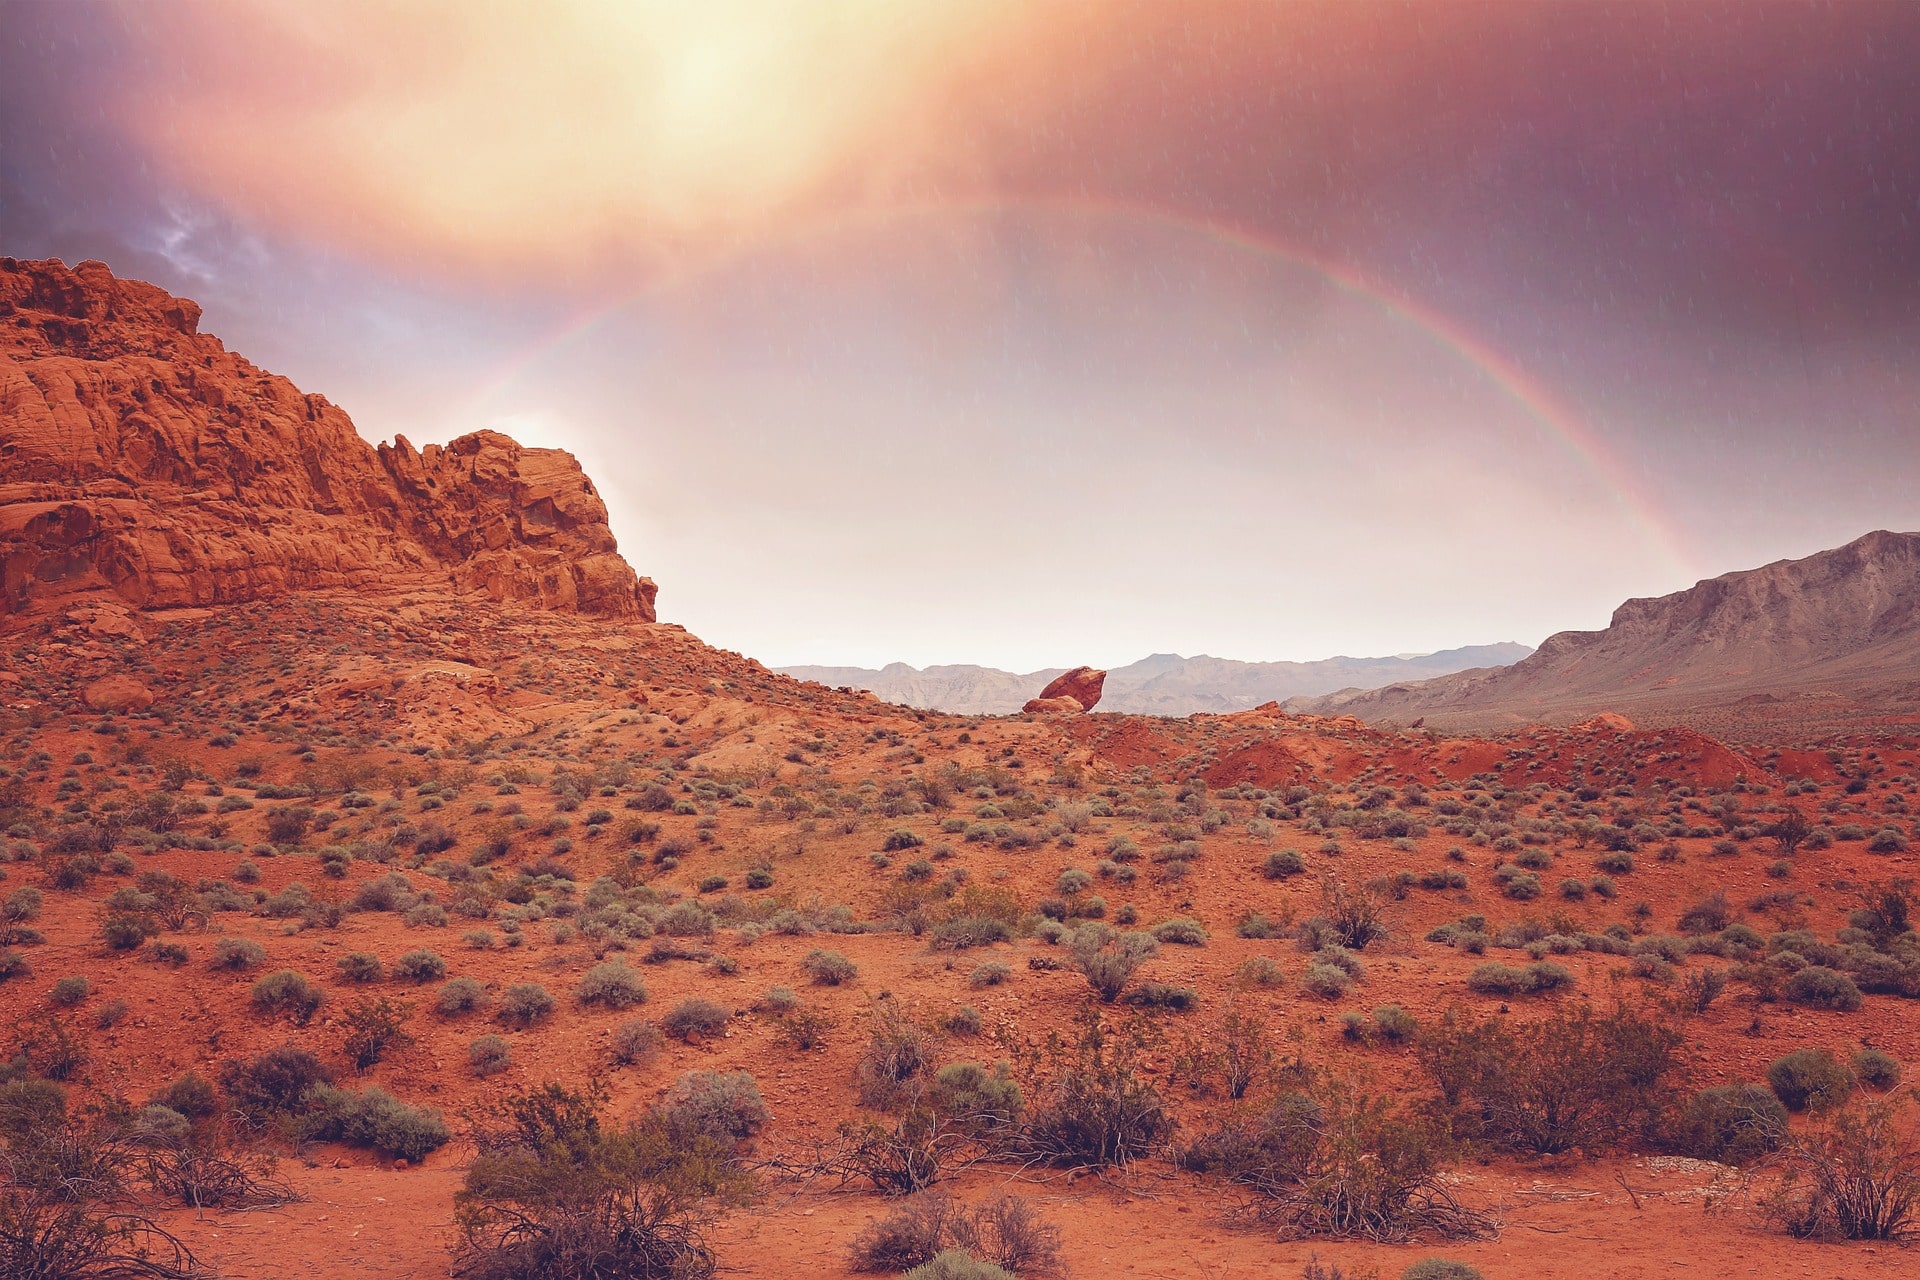 A view of a rainbow over a red desert landscape